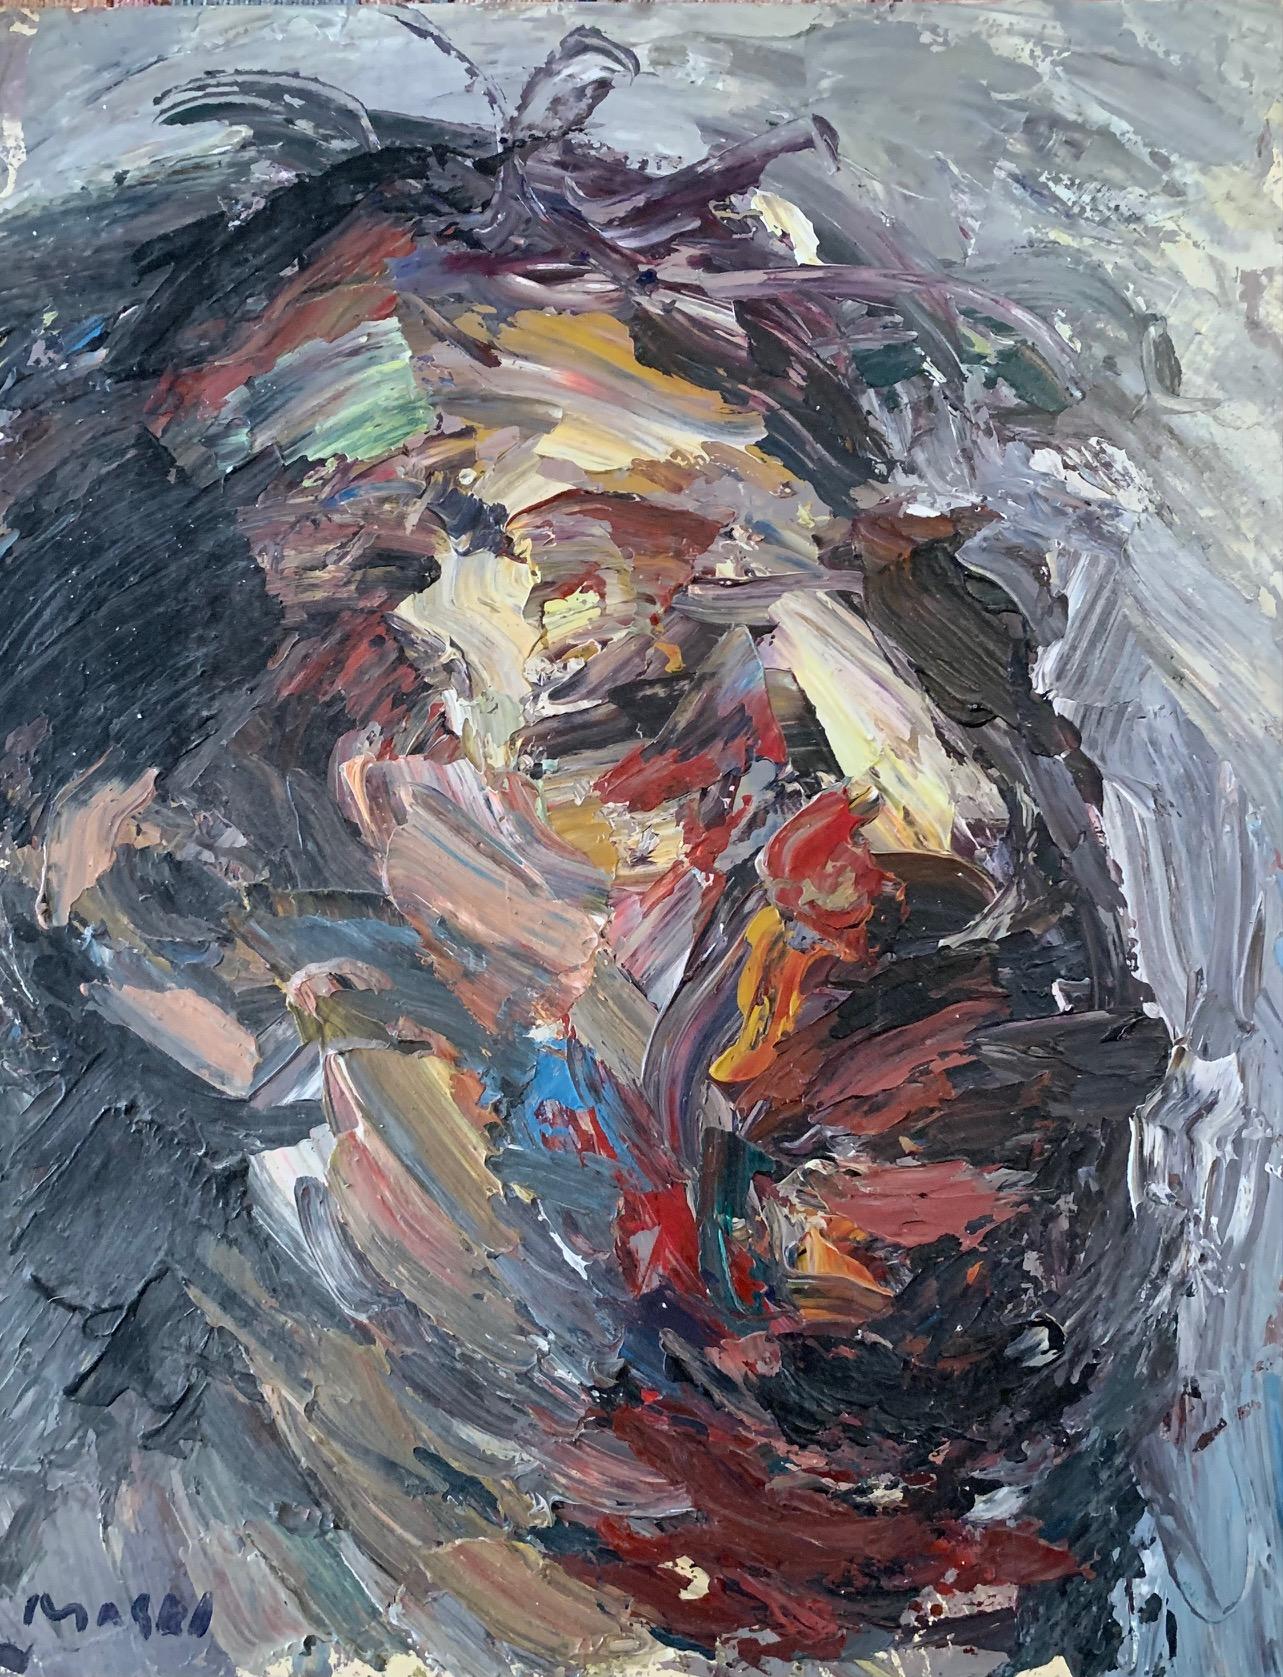 Masri Hayssam Portrait Painting - 'Untitled' Contemporary Abstract Expressionist Portrait by Masri